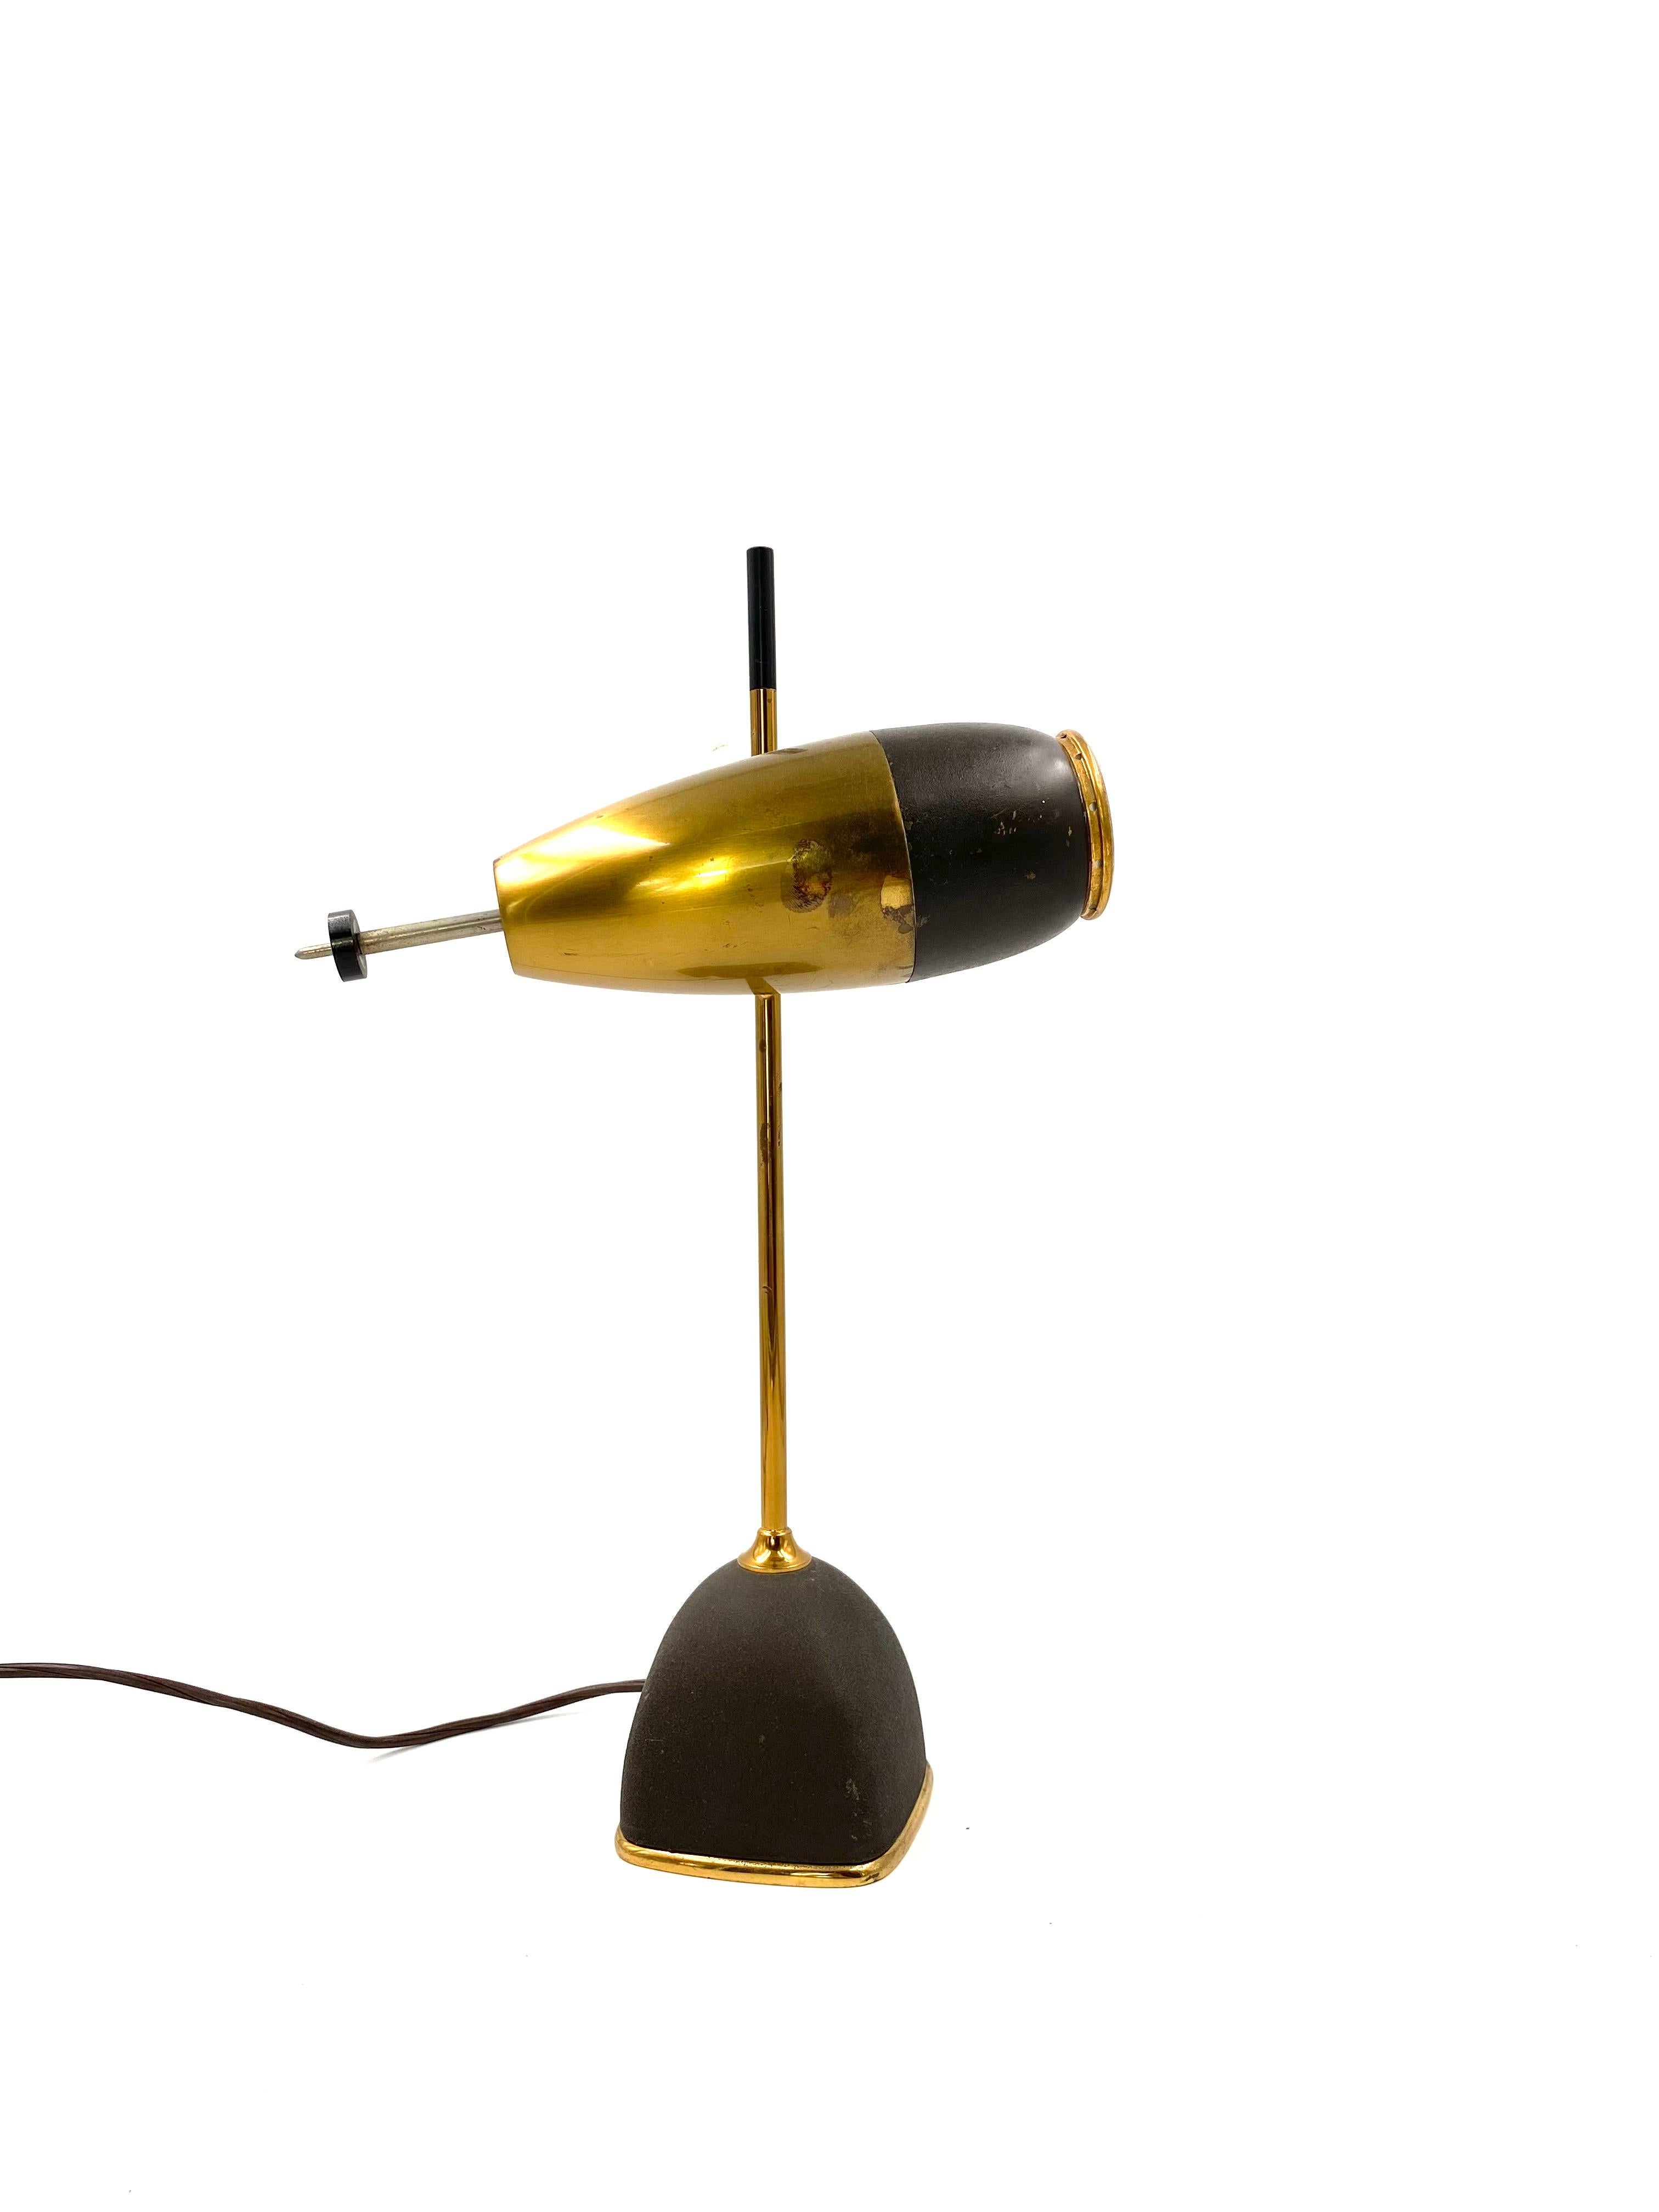 Oscar Torlasco rare mod.577 table / desk lamp

Prod. Lumi, Italia, circa 1960

lacquered metal and brass structure. Glass lens.

Square conical base in black painted brass, painted with wrinkle paint. Built-in transformer. Brass stem. Conical